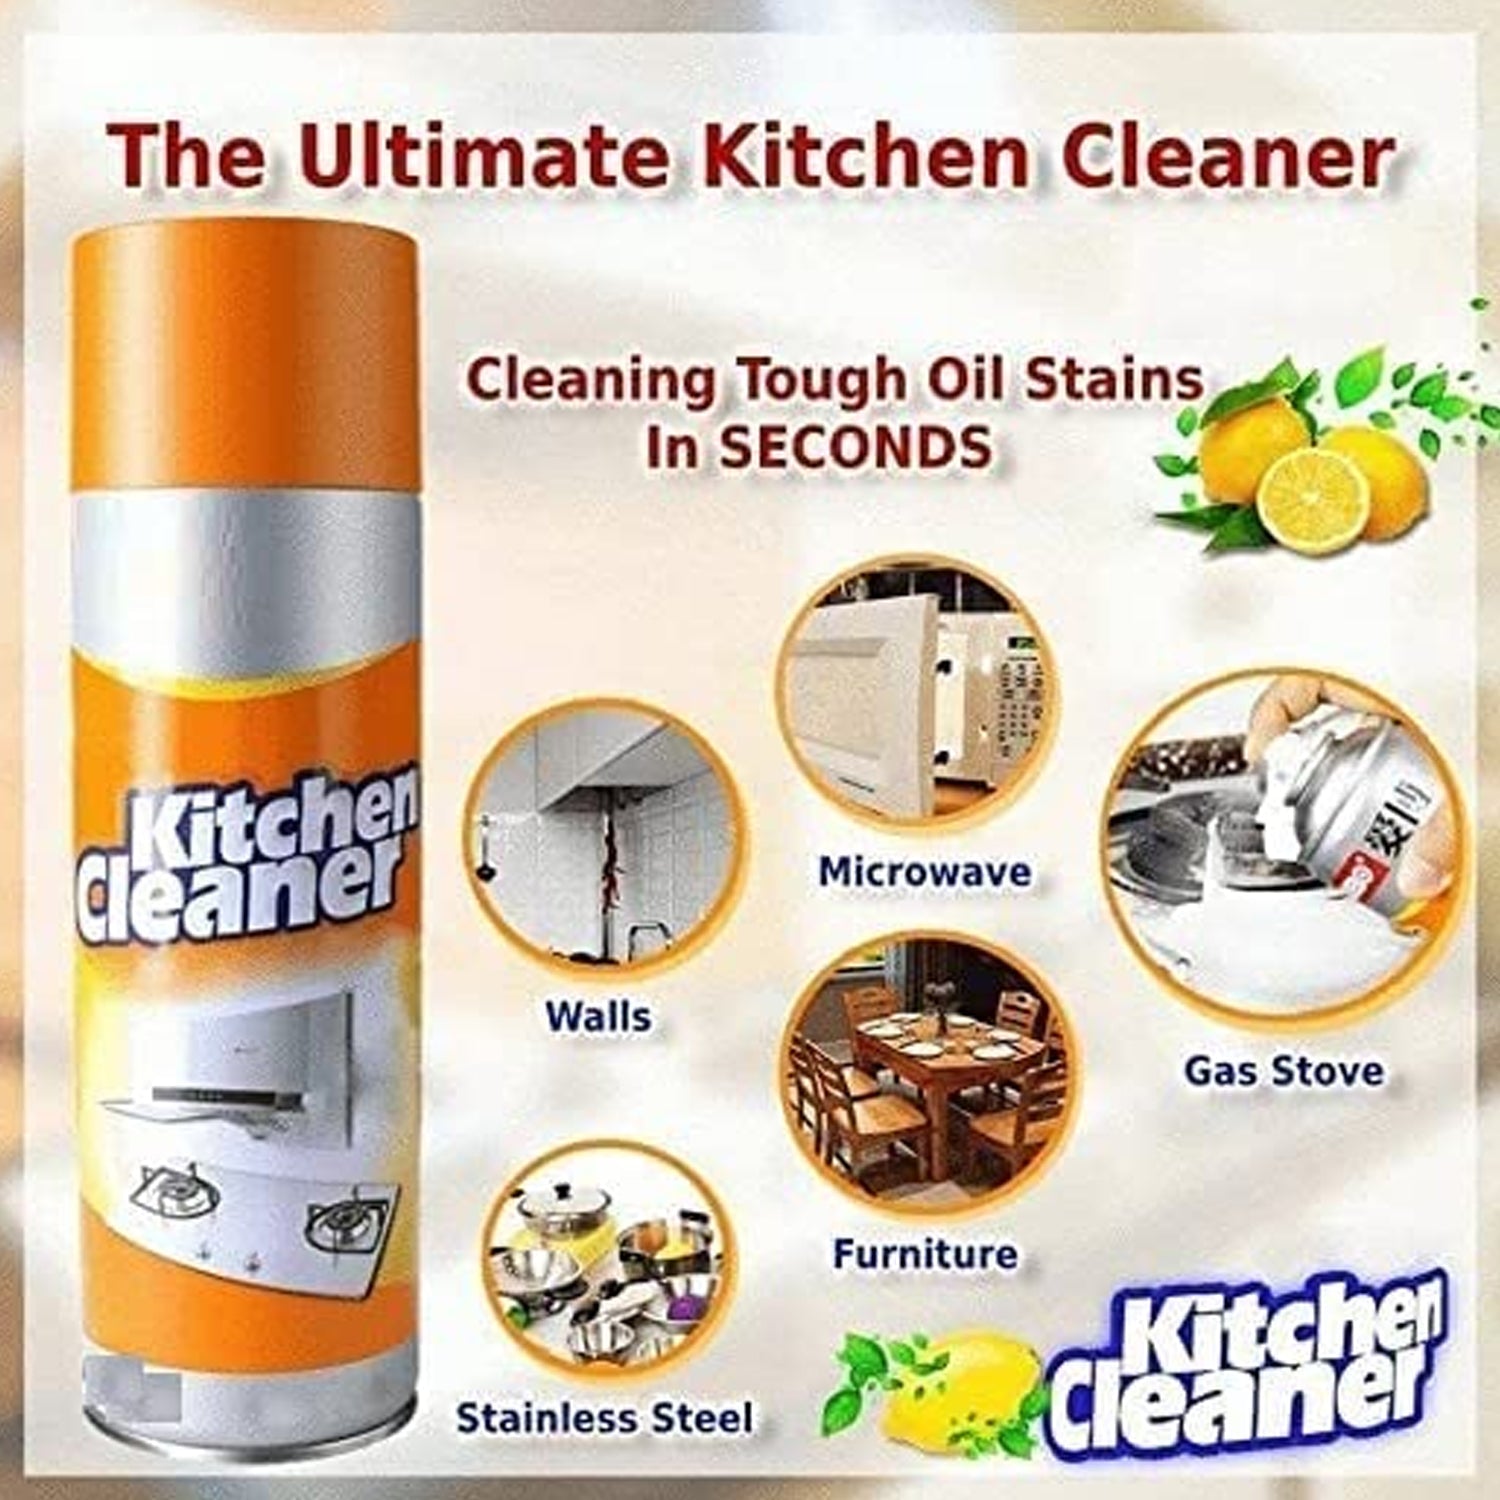 1331 Multipurpose Bubble Foam Cleaner Kitchen Cleaner Spray Oil & Grease Stain Remover Chimney Cleaner Spray Bubble Cleaner All Purpose Foam Degreaser Spray (500 Ml) DeoDap